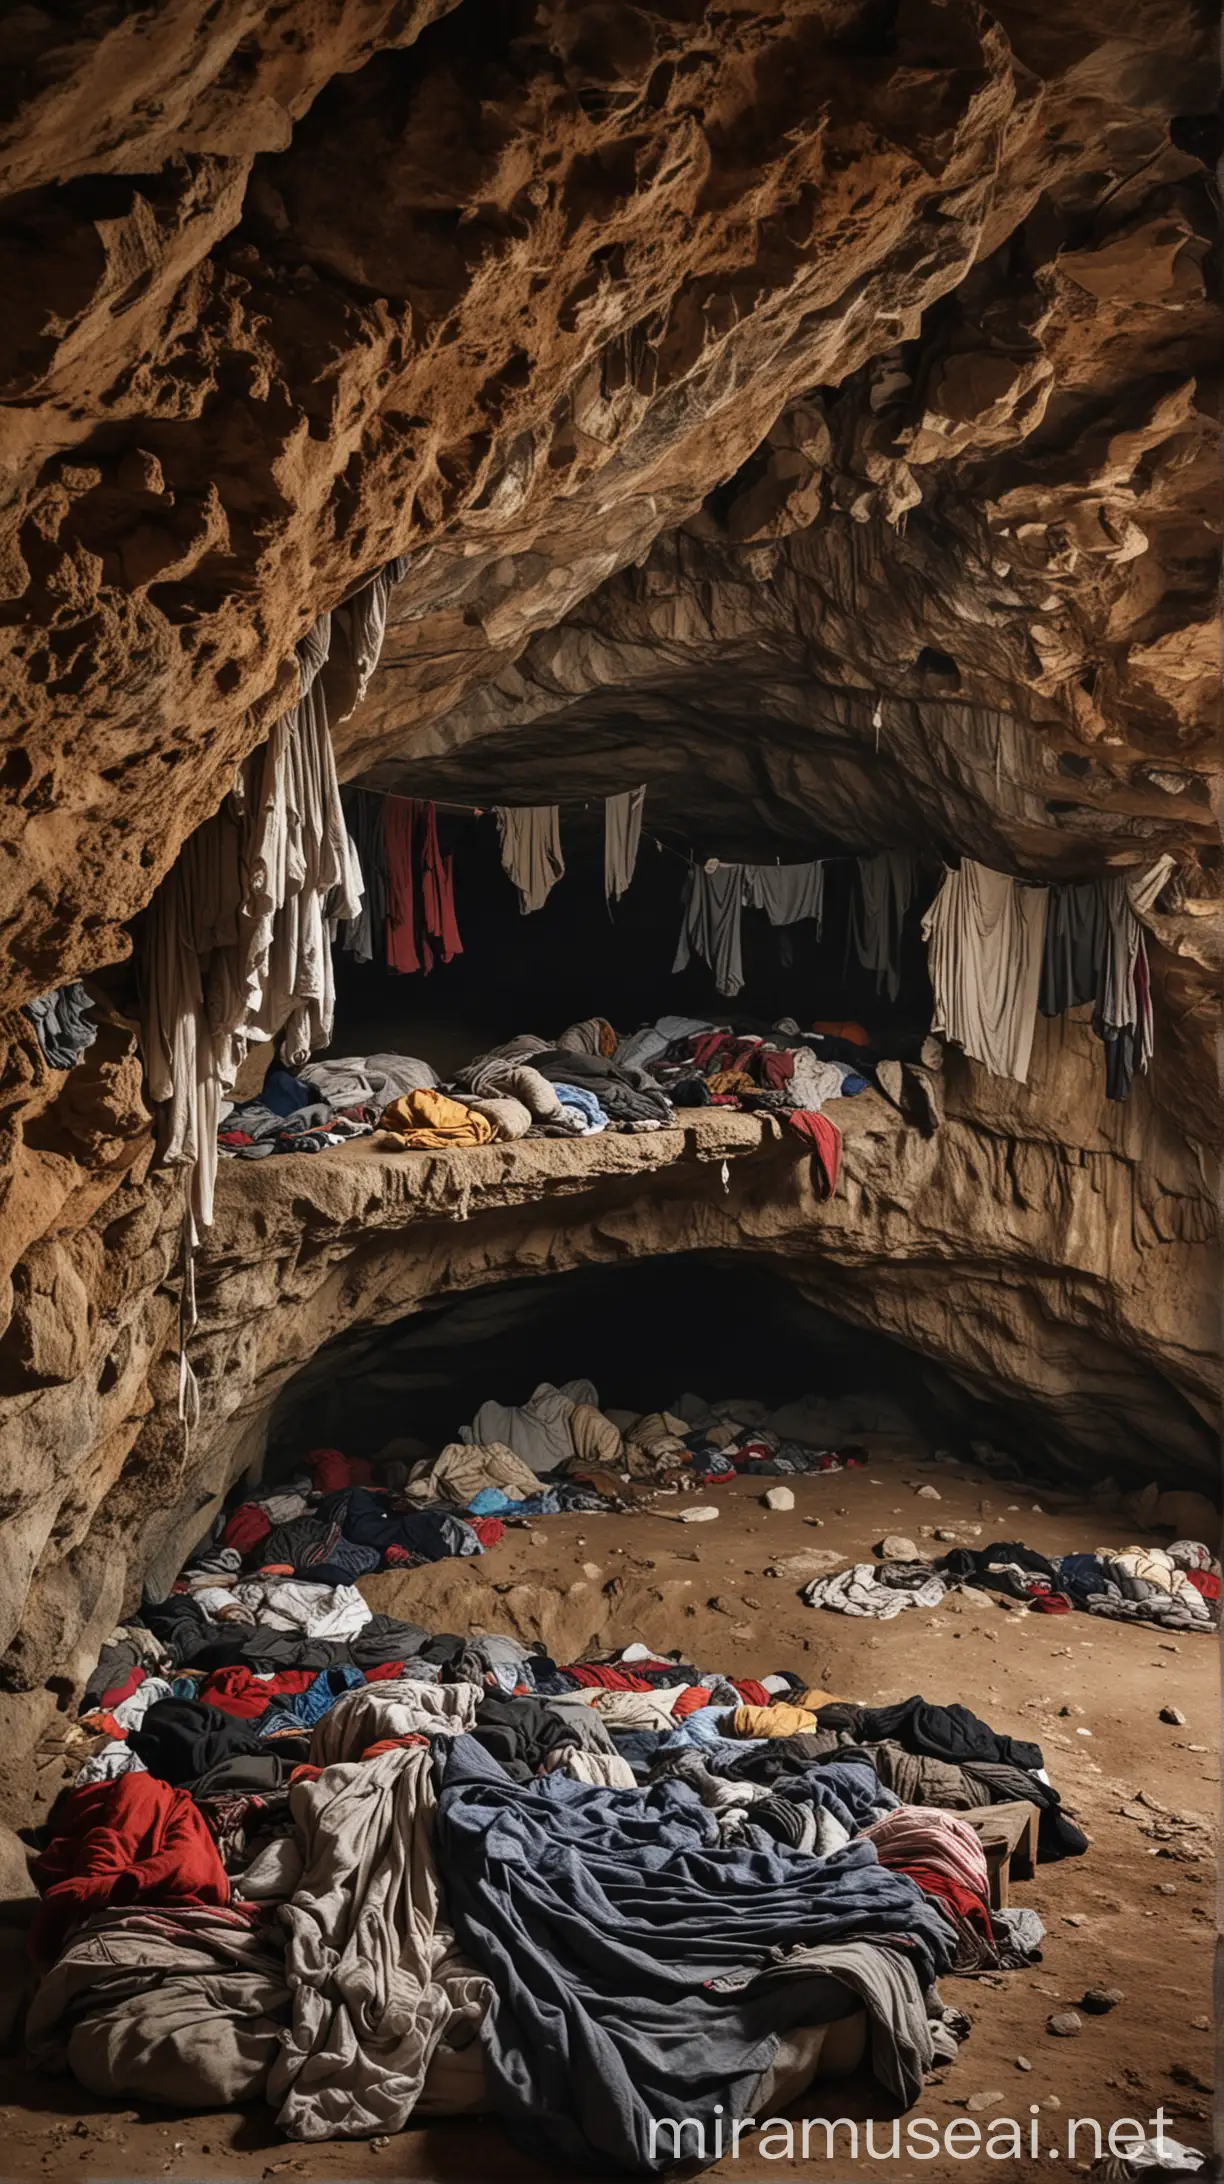 The scene of the youths sleeping in the cave, covered with old and dusty clothes.
